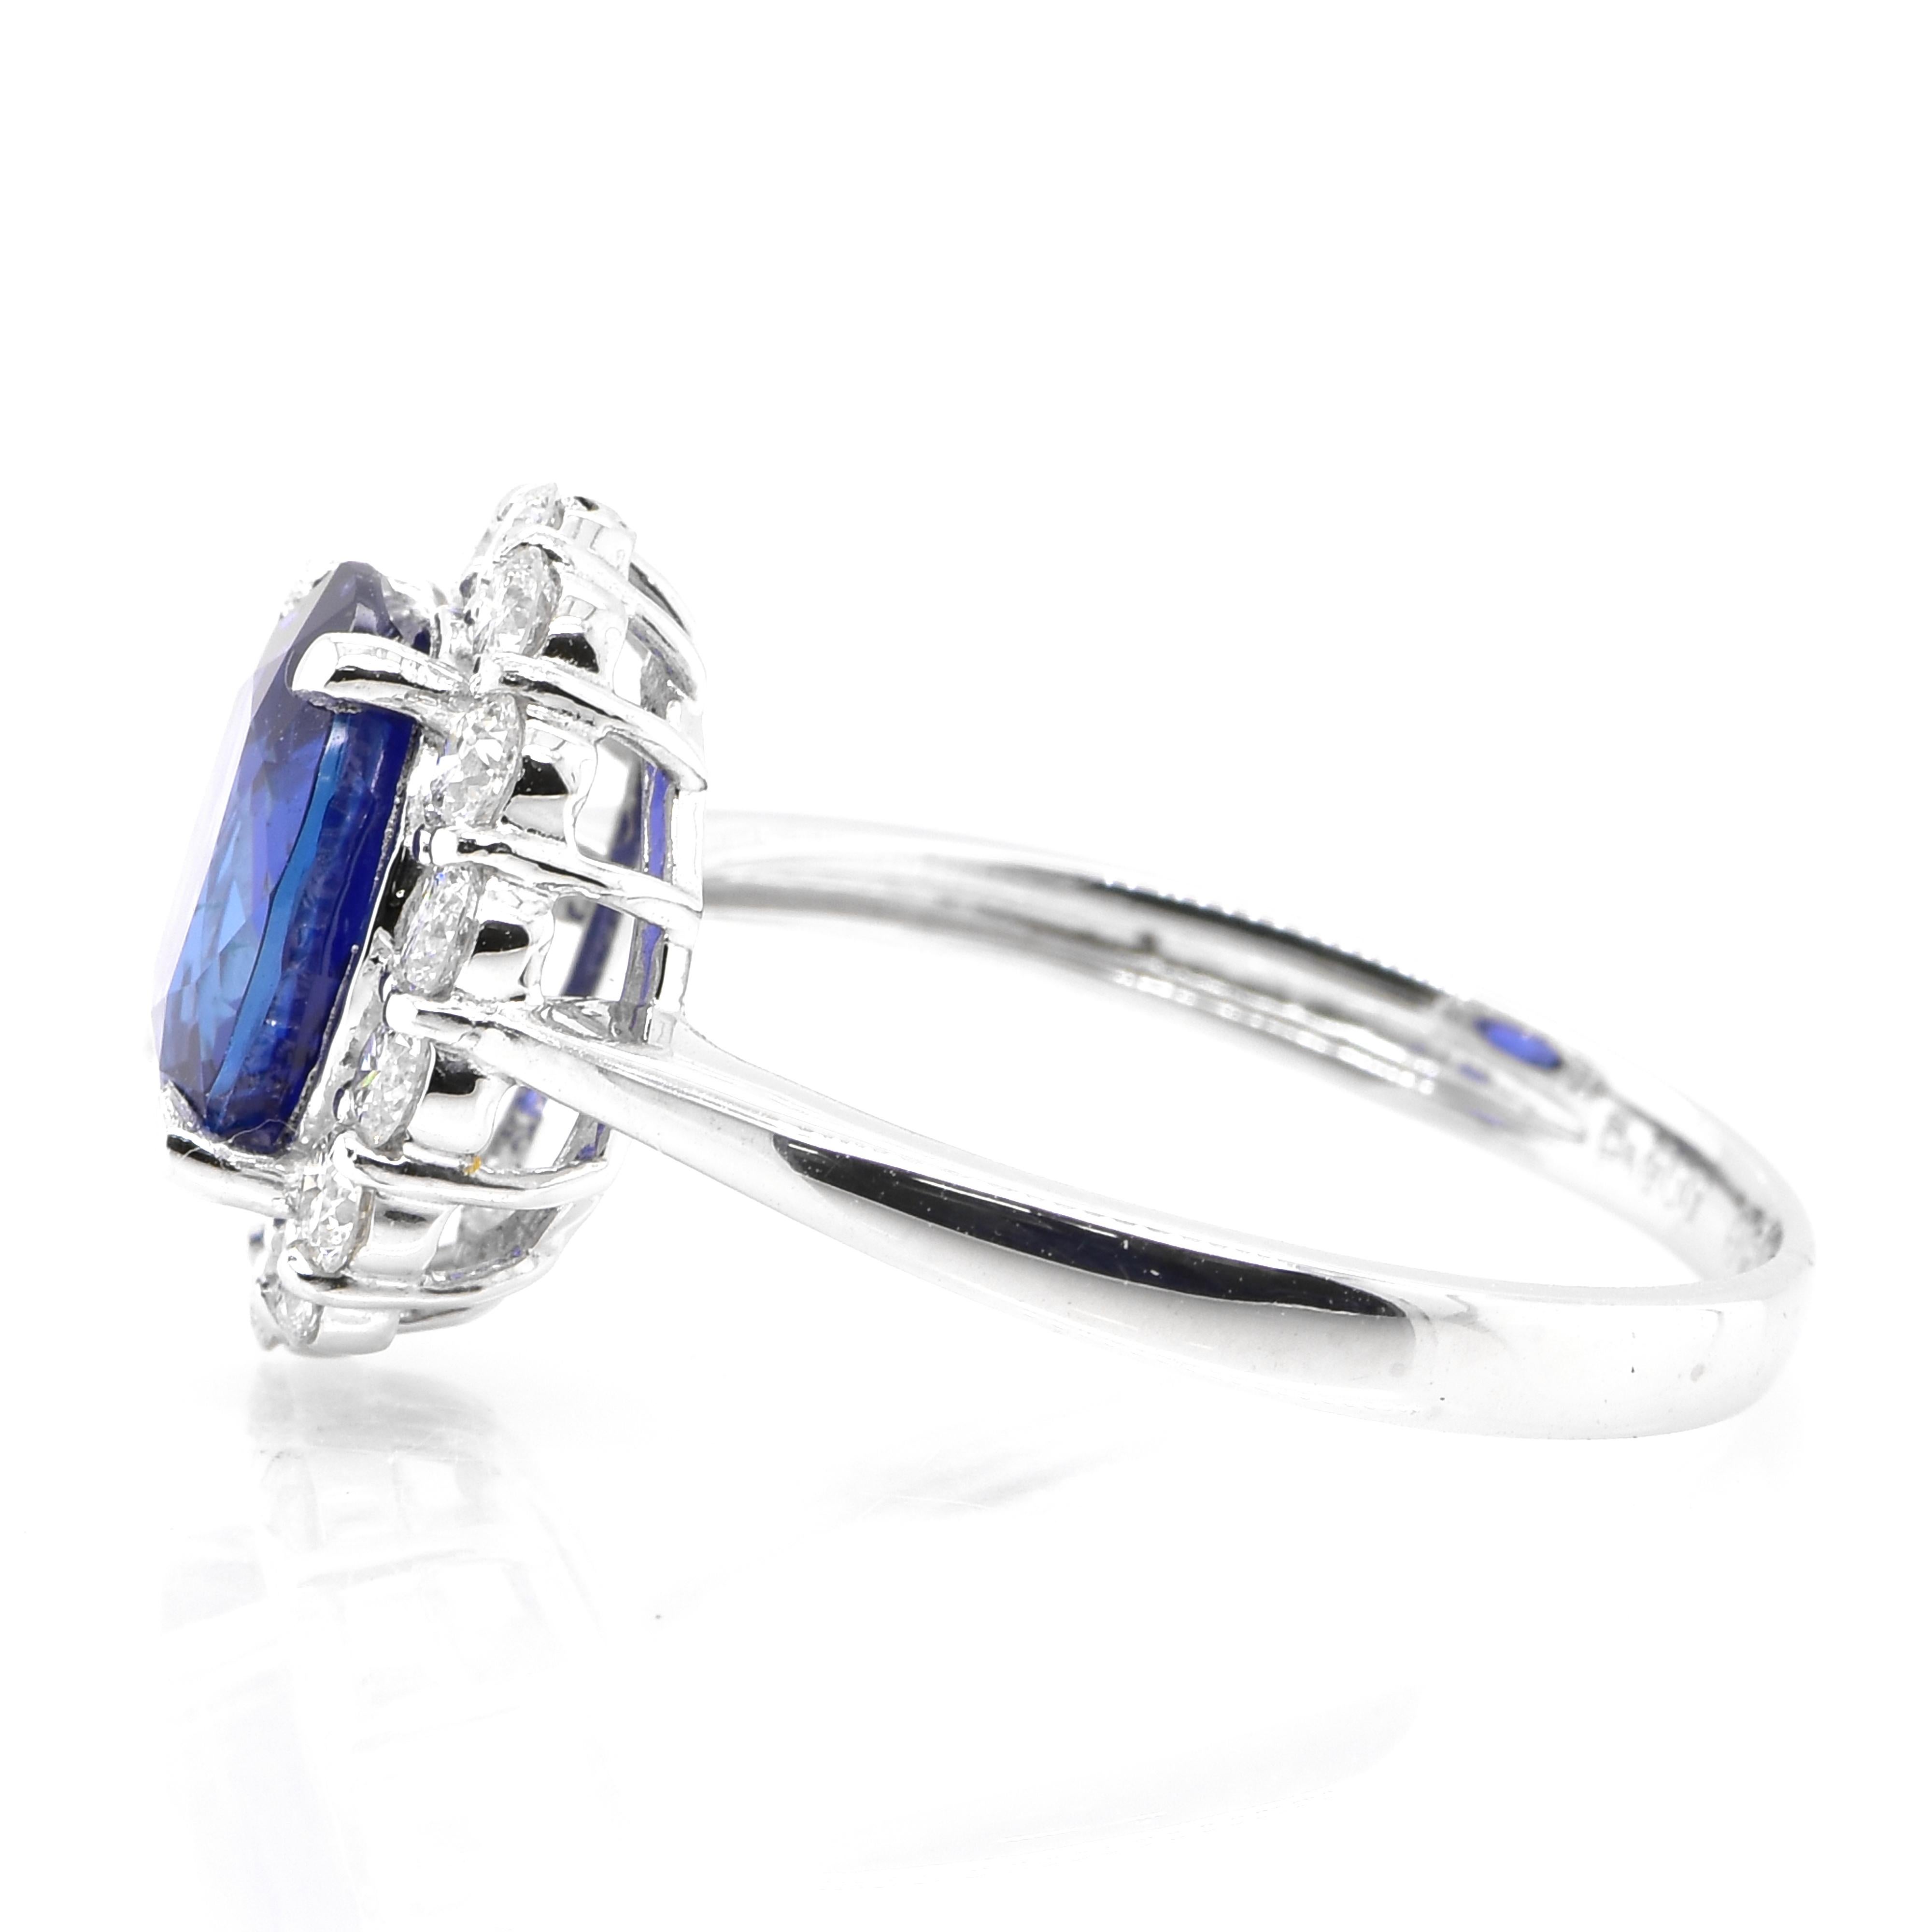 Oval Cut 2.39 Carat Natural, Unheated, Ceylon Sapphire and Diamond Ring Made in Platinum For Sale